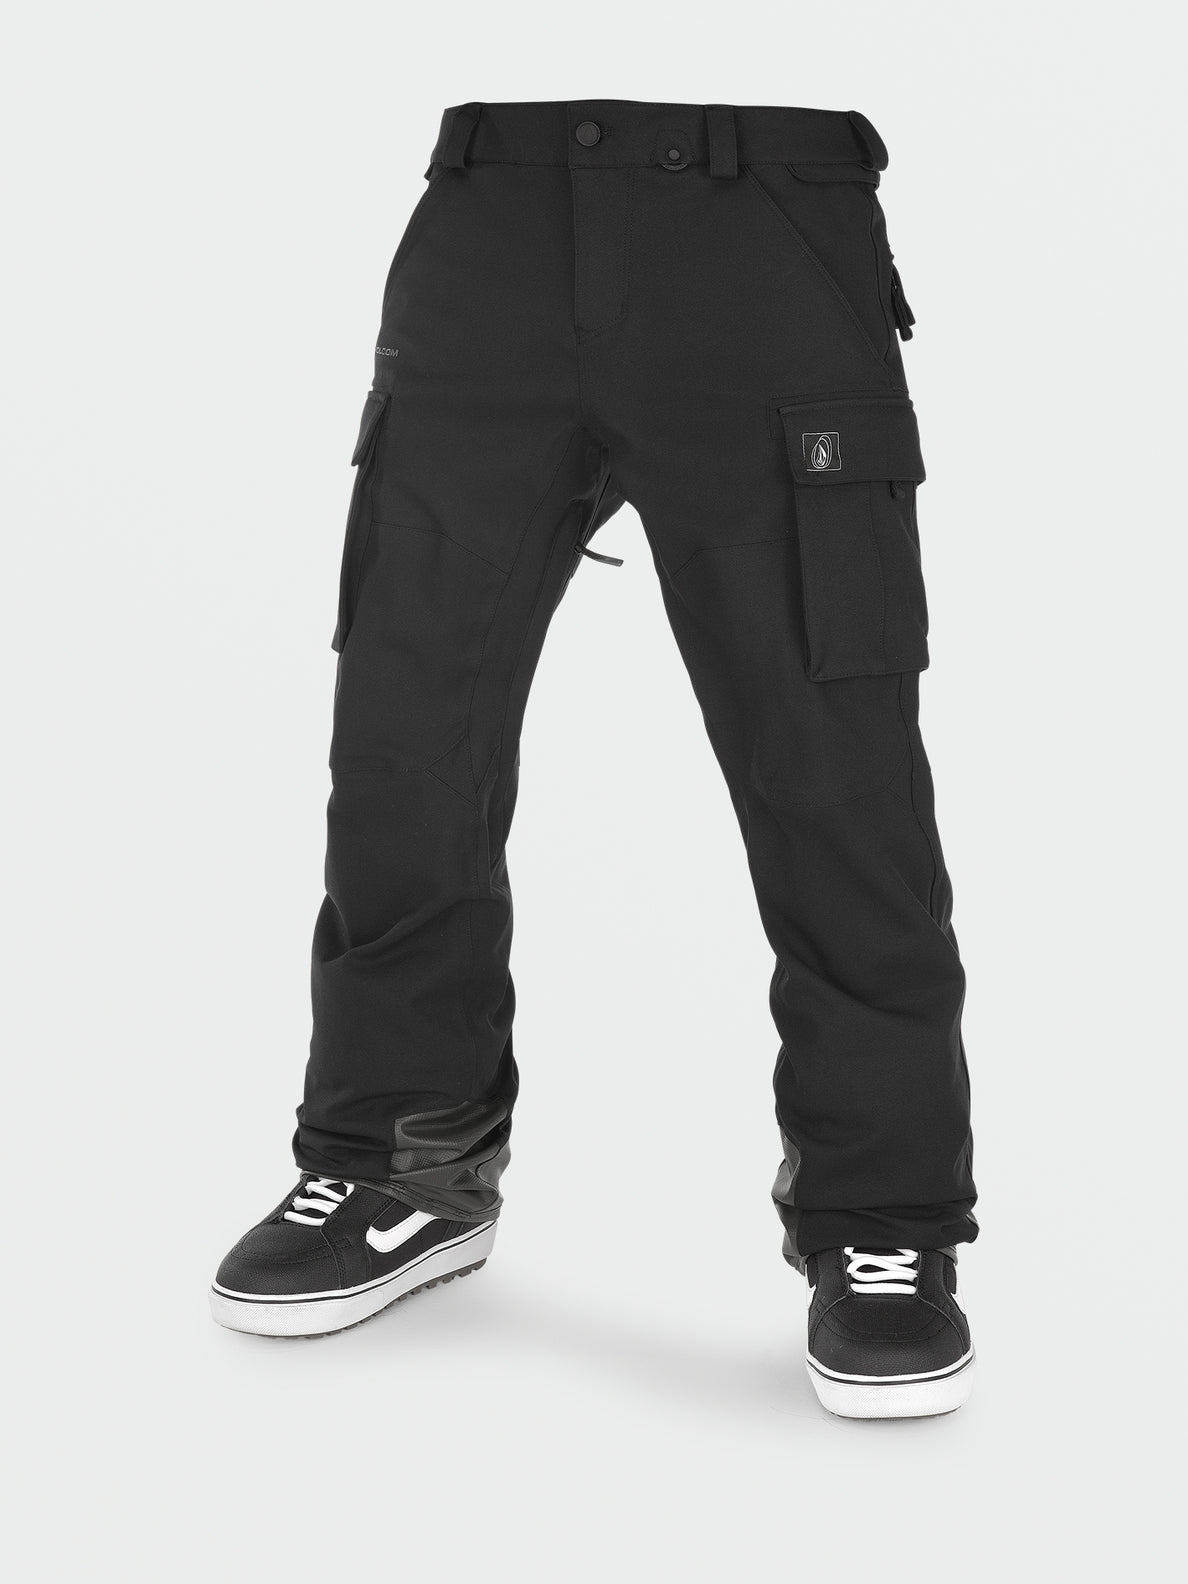 Mens New Articulated Pants - Black